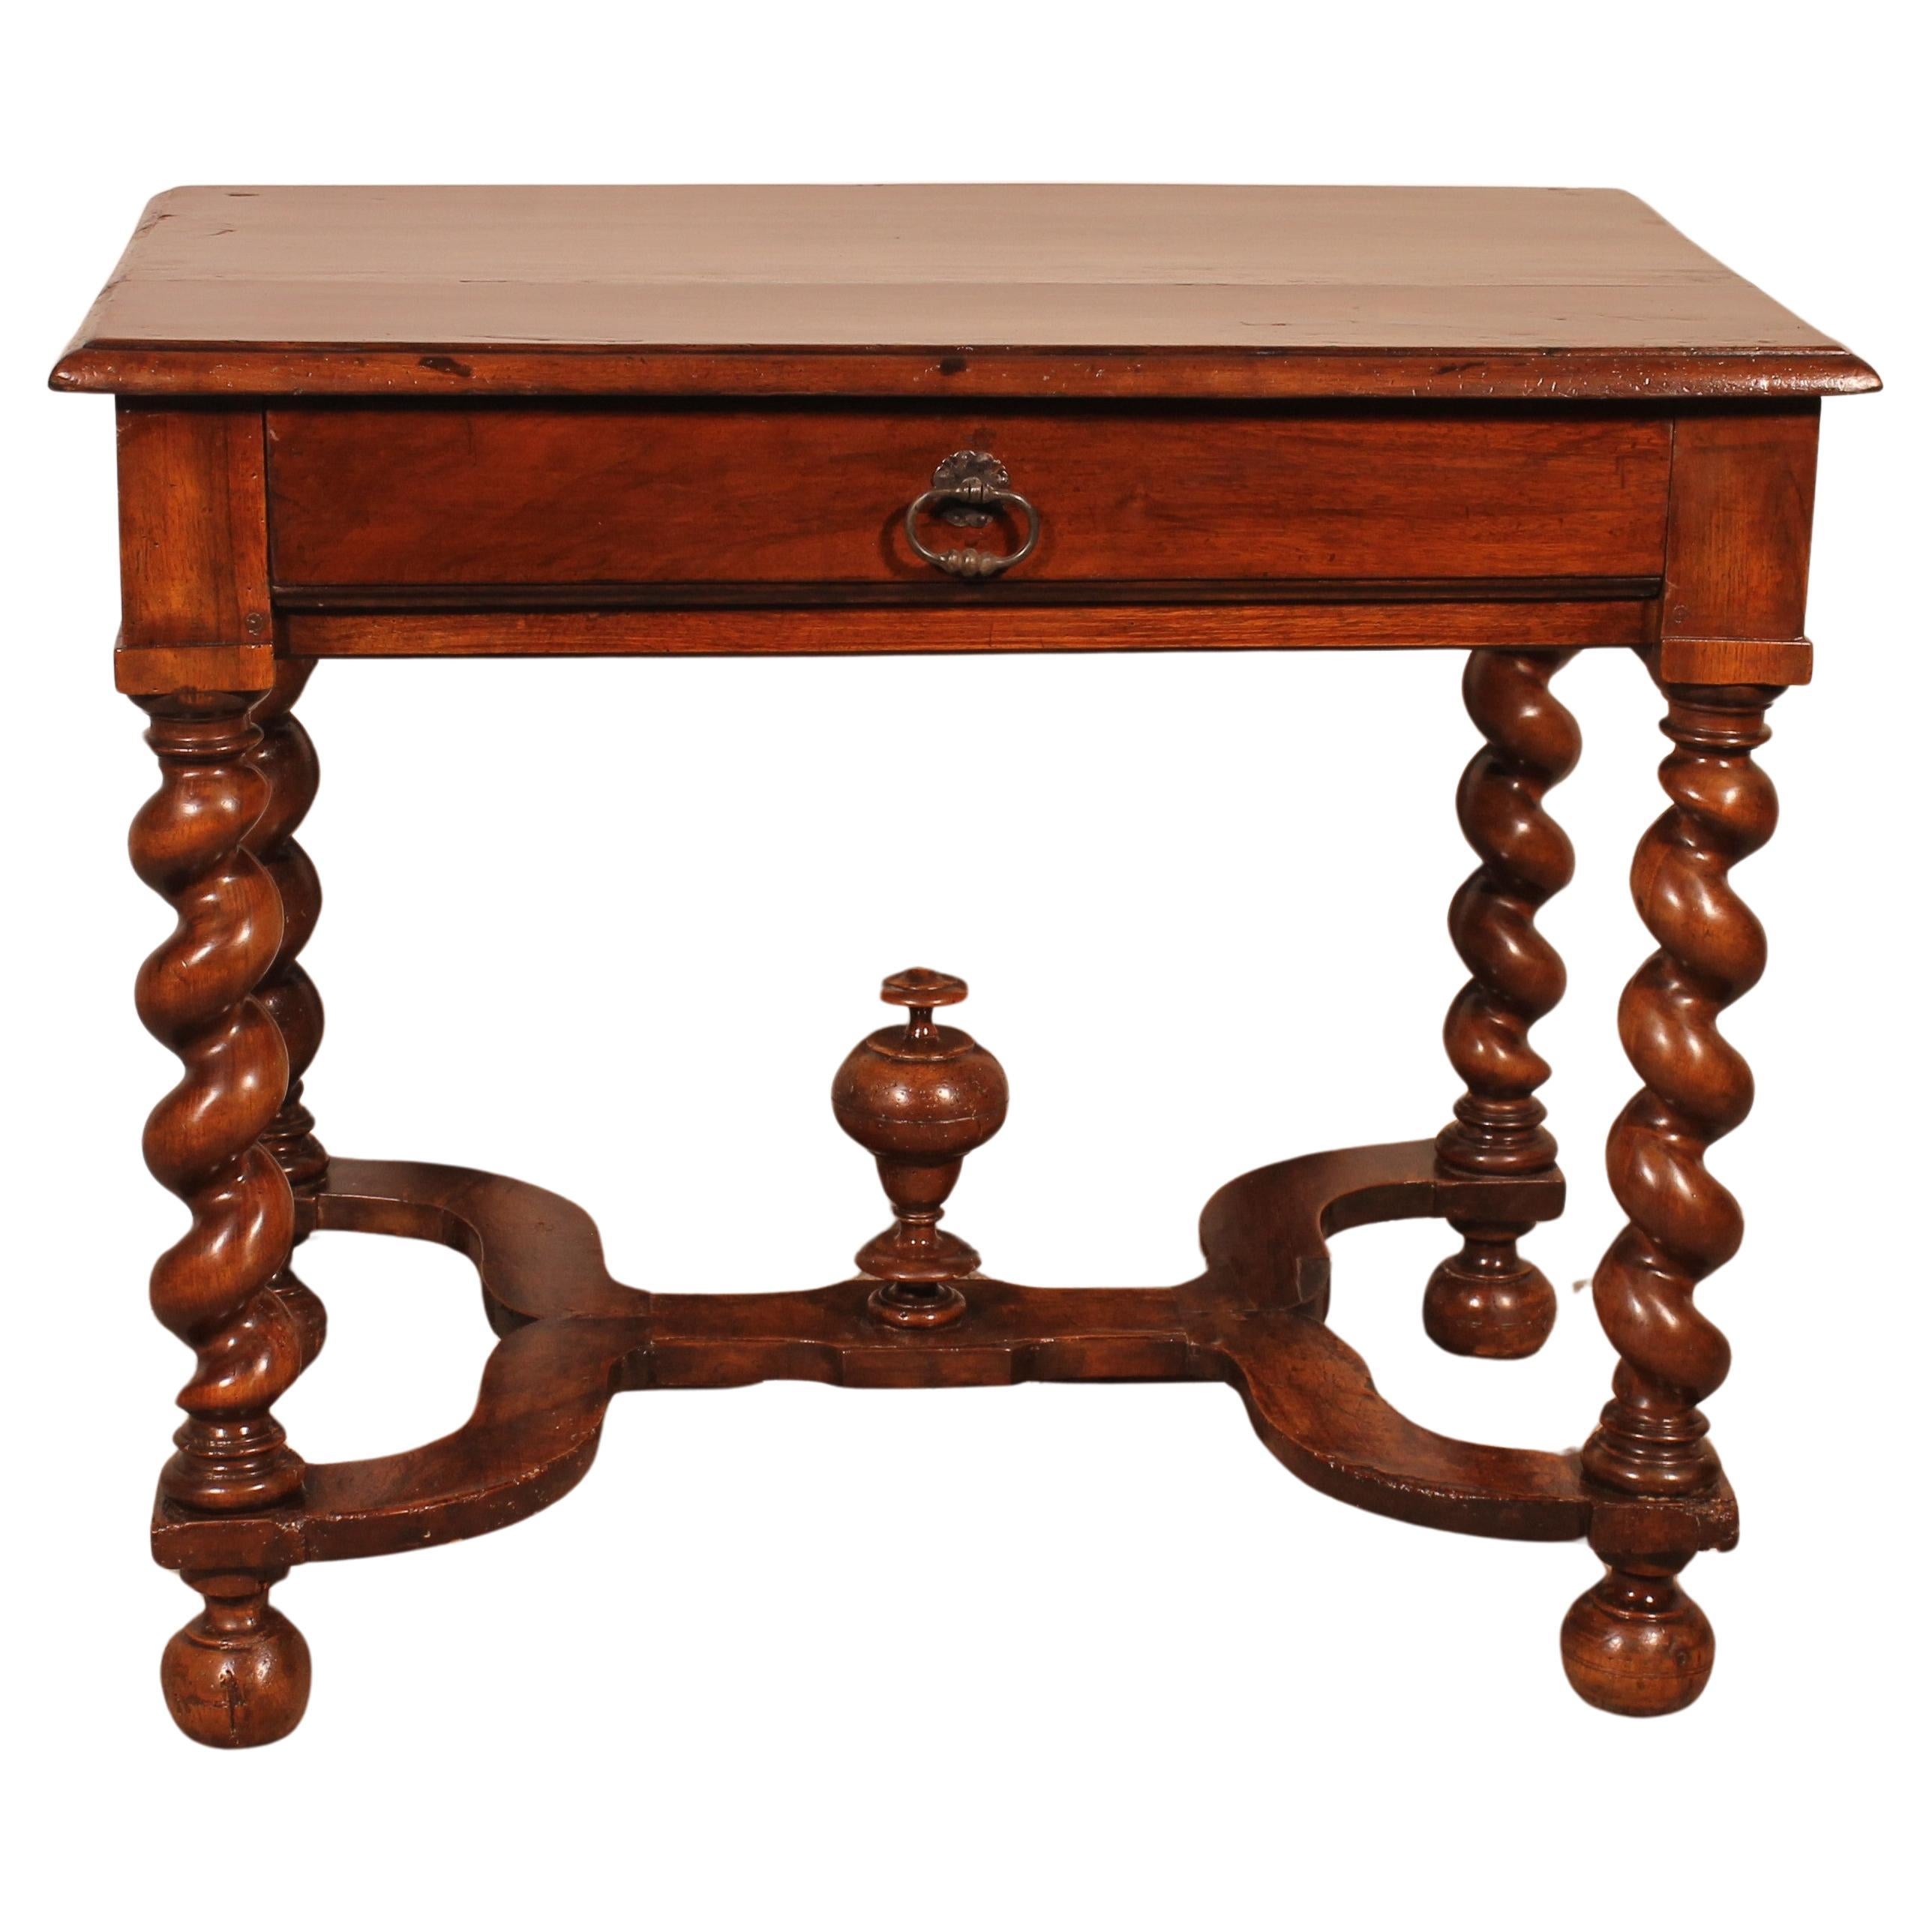 Louis XIII Table In Walnut -17th Century For Sale